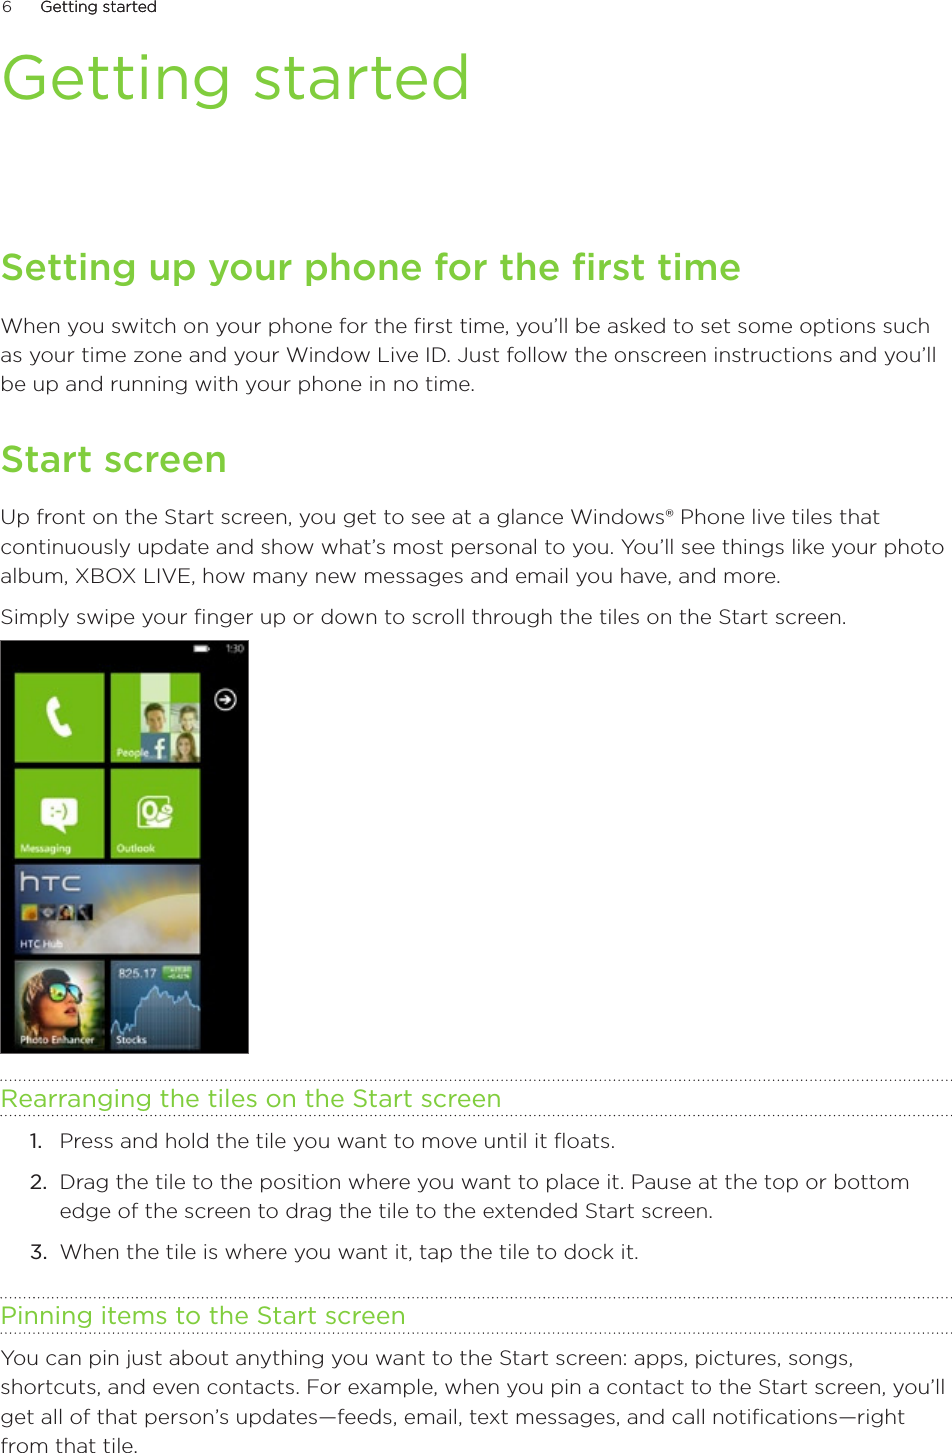 6      Getting startedGetting started      Getting startedSetting up your phone for the first timeWhen you switch on your phone for the first time, you’ll be asked to set some options such as your time zone and your Window Live ID. Just follow the onscreen instructions and you’ll be up and running with your phone in no time. Start screenUp front on the Start screen, you get to see at a glance Windows® Phone live tiles that continuously update and show what’s most personal to you. You’ll see things like your photo album, XBOX LIVE, how many new messages and email you have, and more.Simply swipe your finger up or down to scroll through the tiles on the Start screen.Rearranging the tiles on the Start screenPress and hold the tile you want to move until it floats.Drag the tile to the position where you want to place it. Pause at the top or bottom edge of the screen to drag the tile to the extended Start screen.When the tile is where you want it, tap the tile to dock it. Pinning items to the Start screenYou can pin just about anything you want to the Start screen: apps, pictures, songs, shortcuts, and even contacts. For example, when you pin a contact to the Start screen, you’ll get all of that person’s updates—feeds, email, text messages, and call notifications—right from that tile.1.2.3.